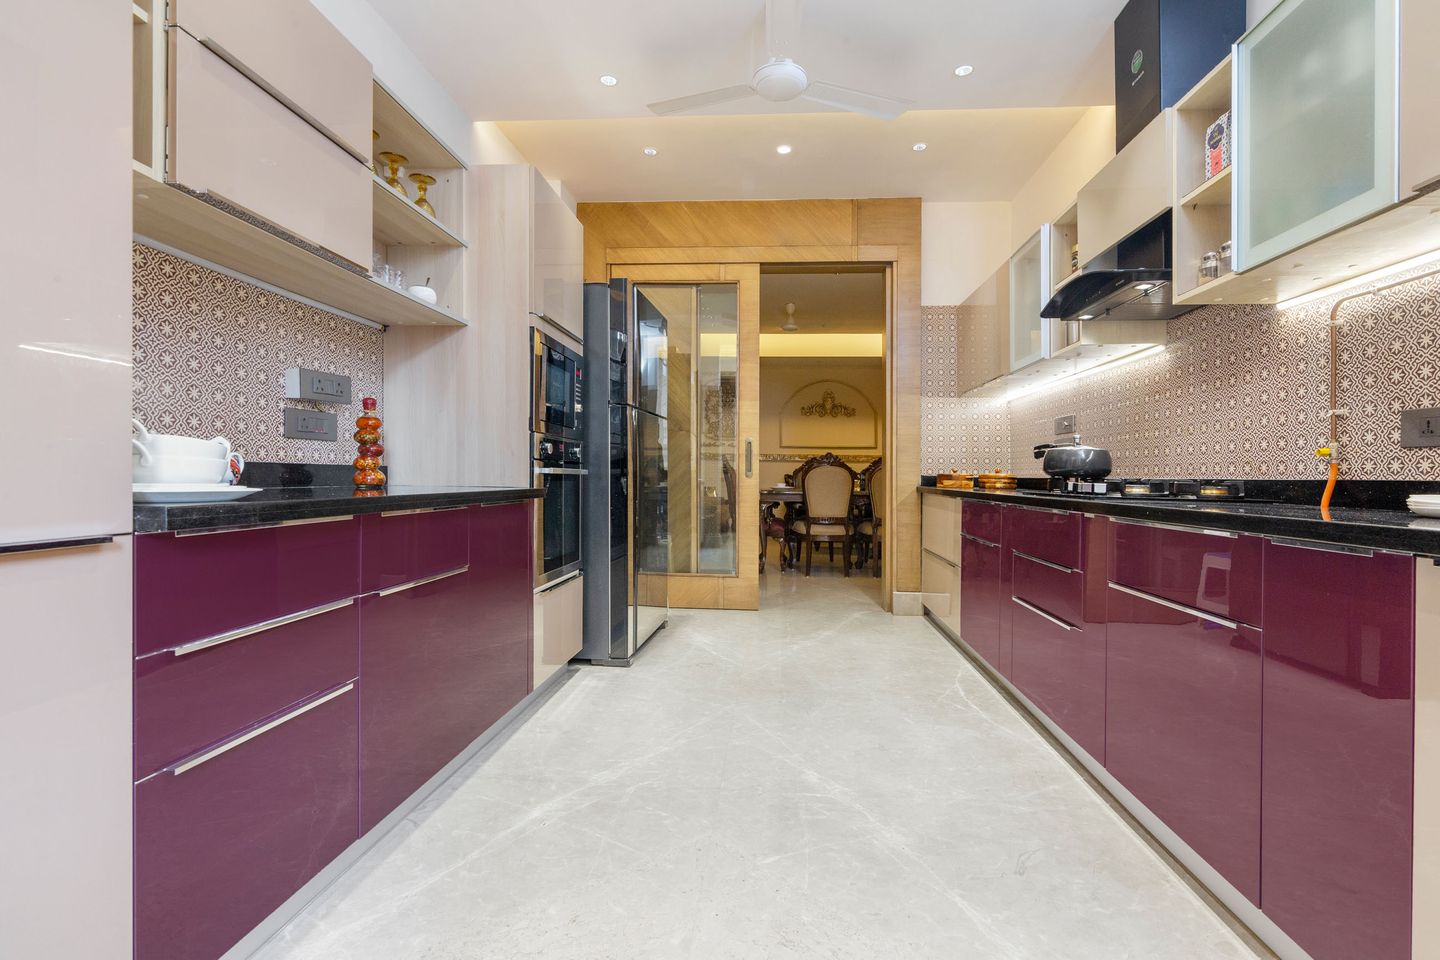 14x9 Ft Aubergine and Light Beige Parallel Kitchen with Granite Countertop - Livspace